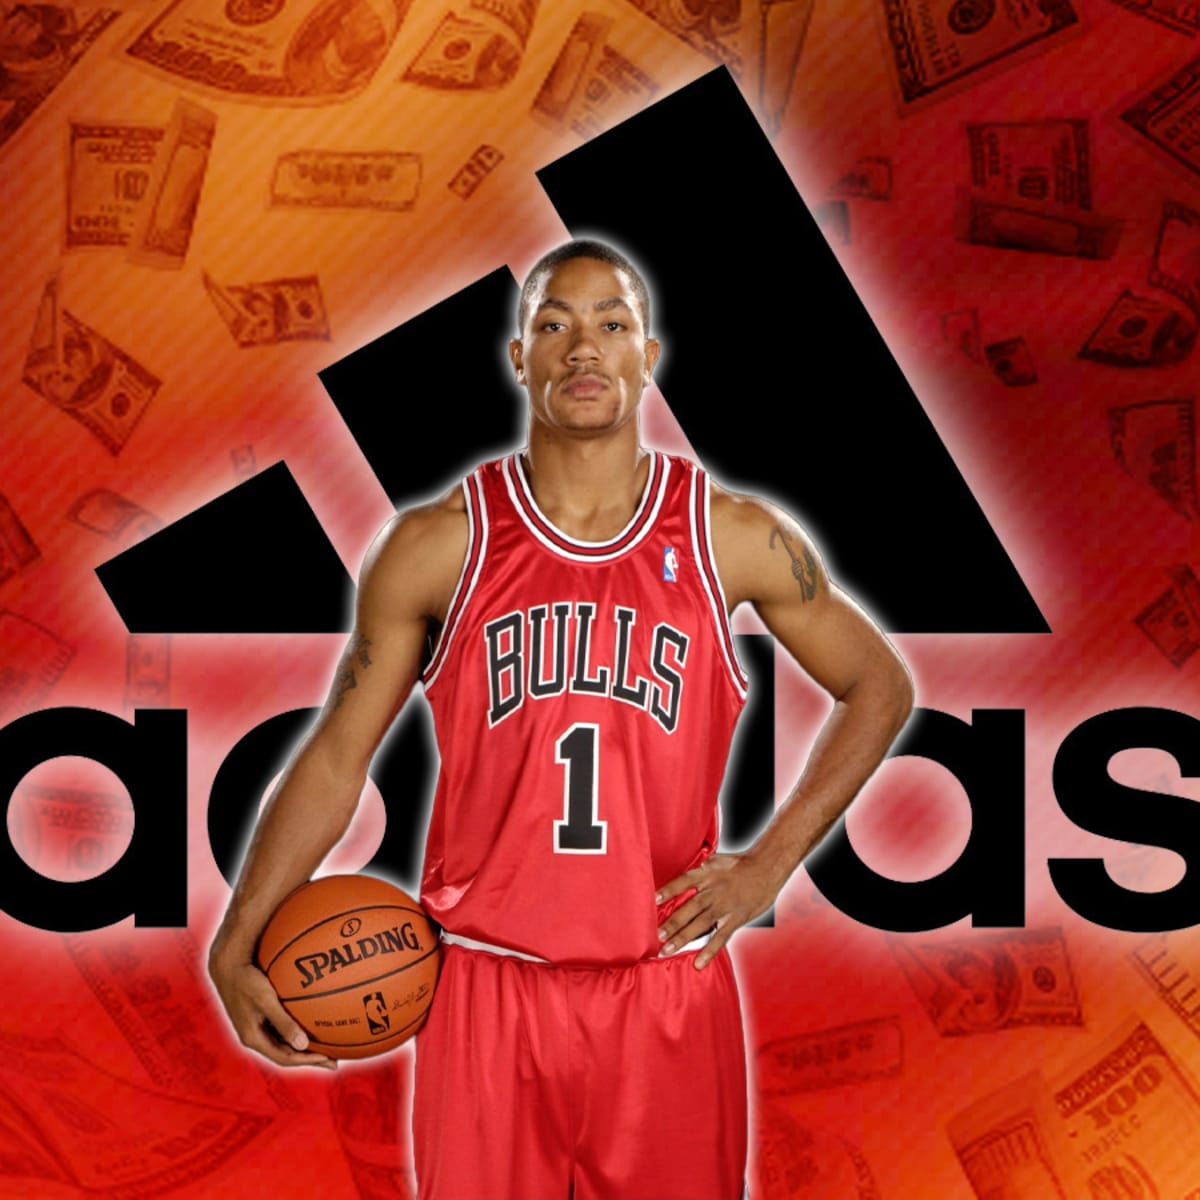 Basketball Forever - BREAKING: Derrick Rose has signed with the